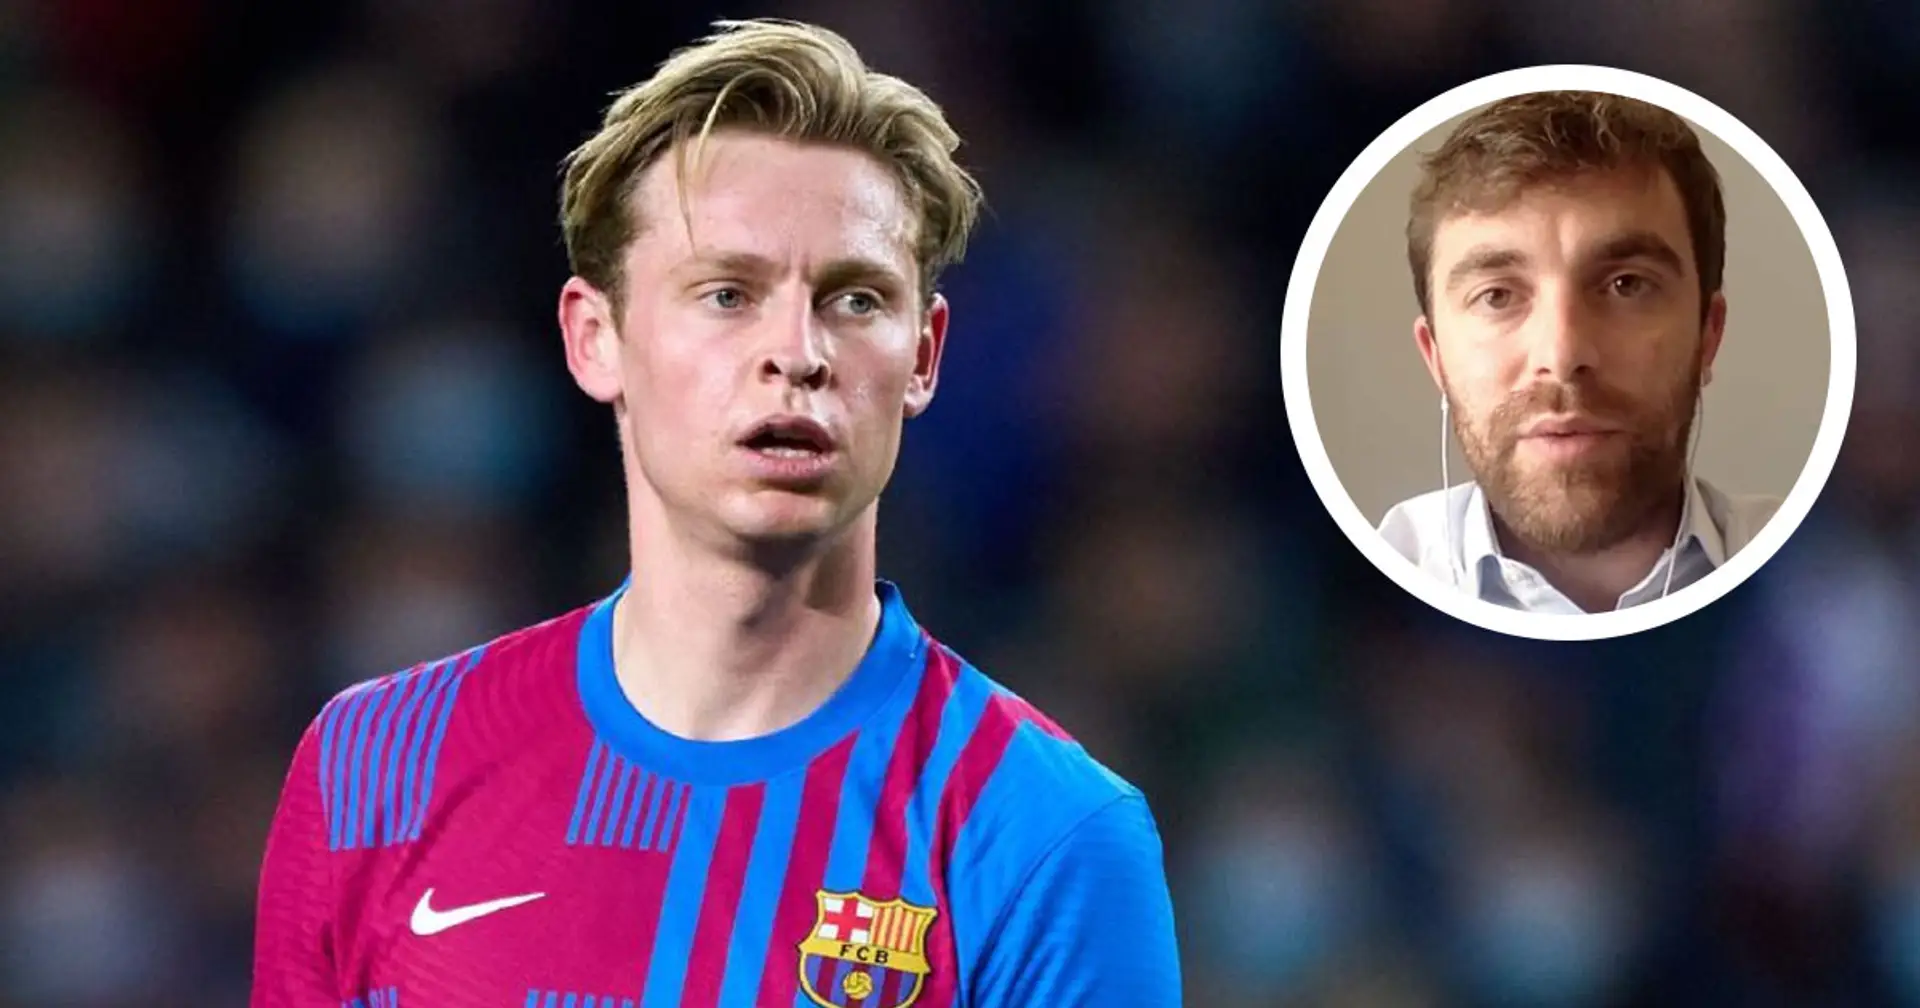 Fabrizio Romano gives latest update on United's chase for Frenkie de Jong (reliability: 5 stars)